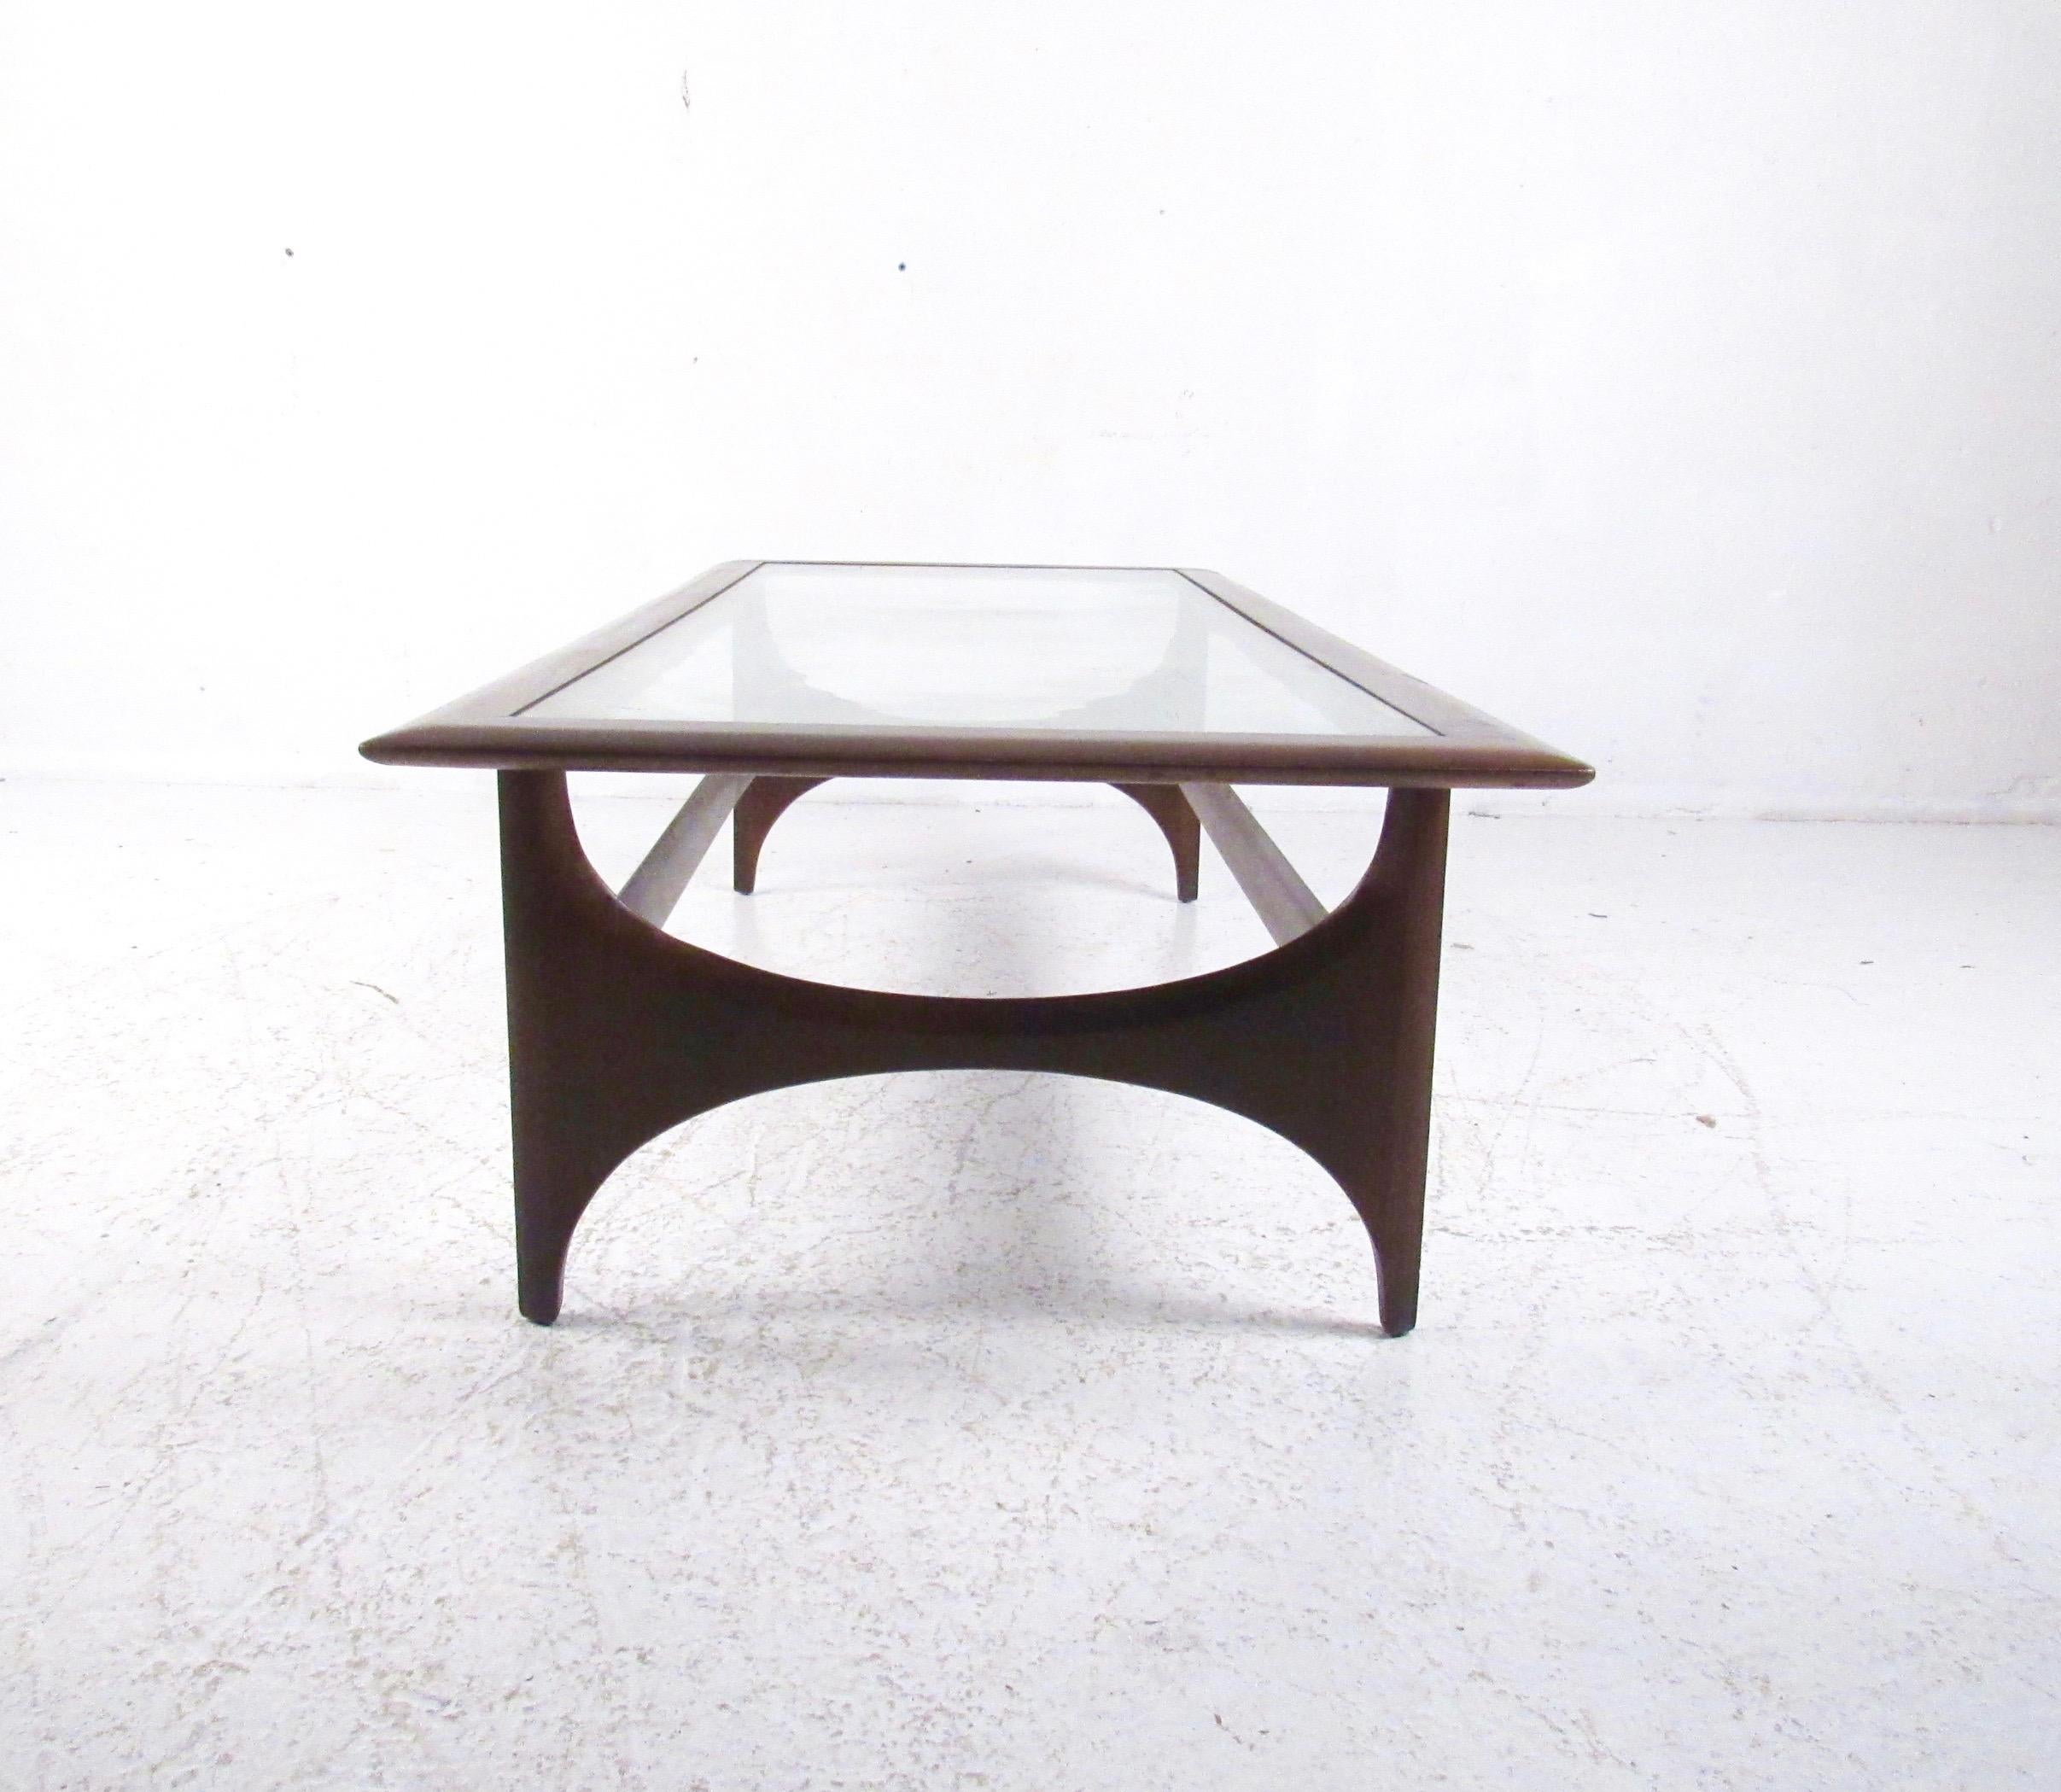 Late 20th Century Mid-Century Modern Walnut Coffee Table by Lane For Sale